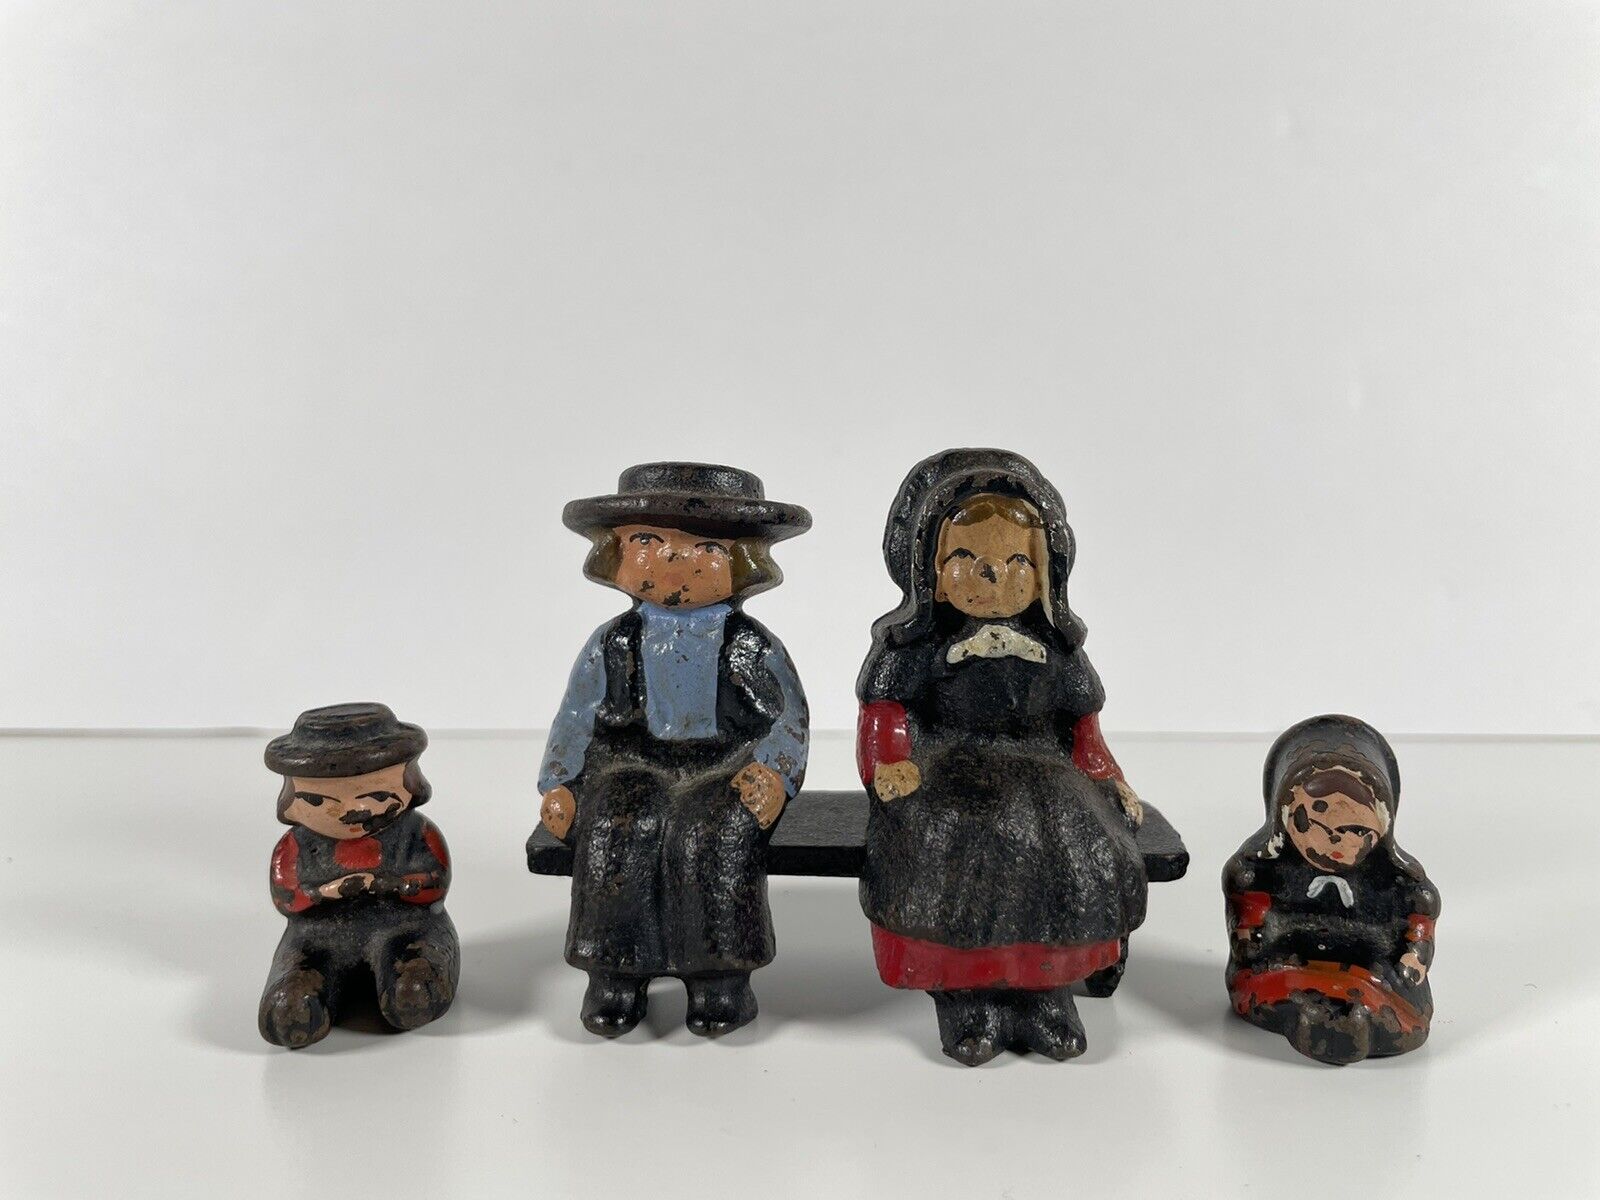 Vintage Cast Iron Amish Family Figurines Sitting On Bench Hand Painted